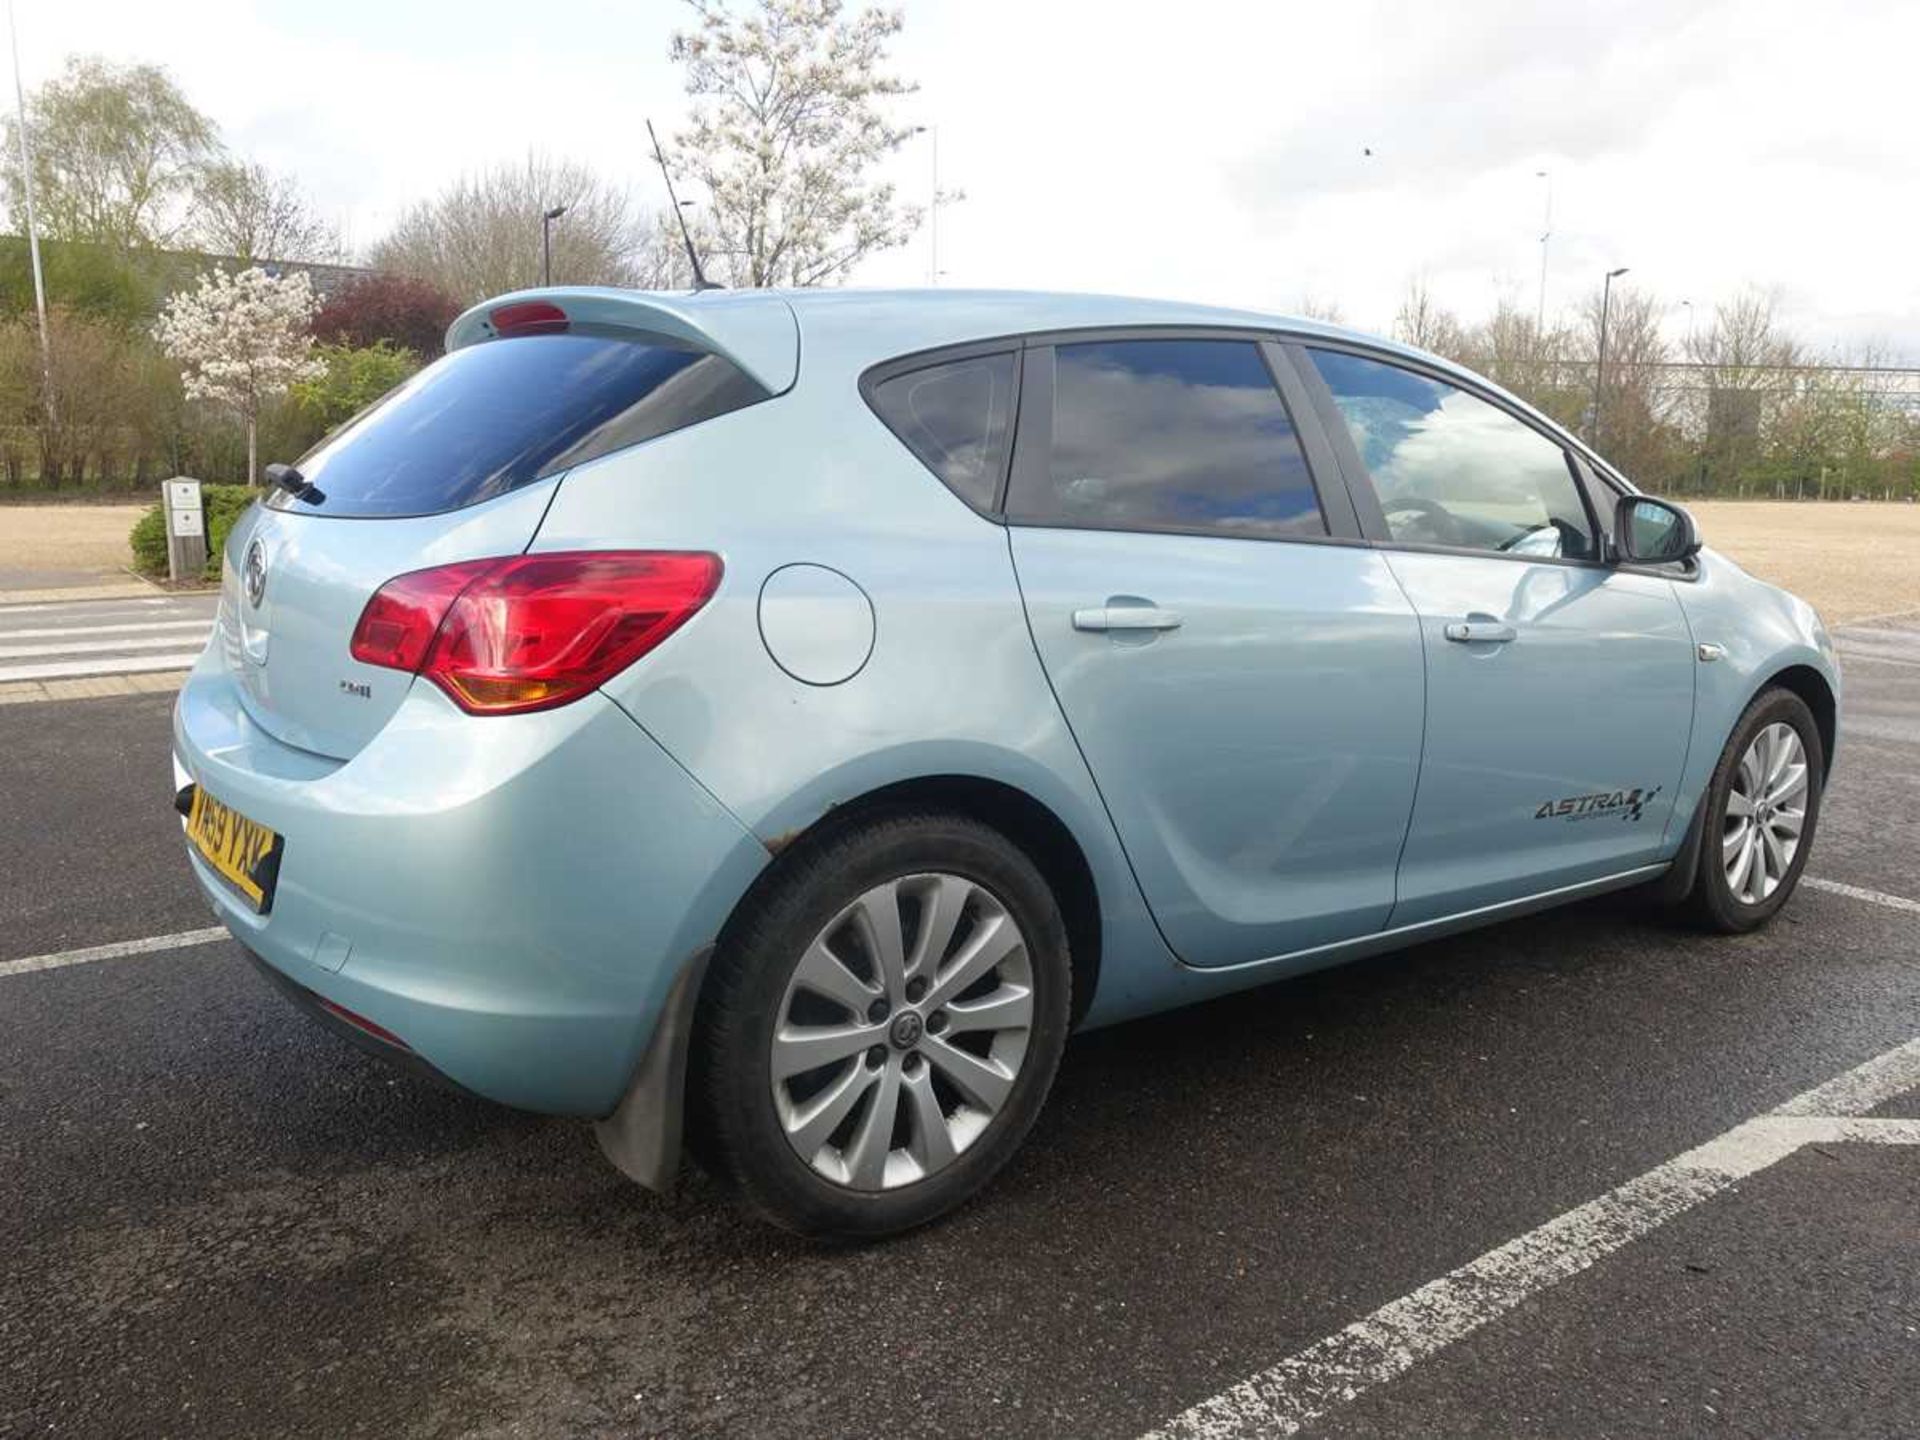 (VN59 YXK) Vauxhall Astra Exclusiv CDTI 108 in blue, first registered 17/12/2009, 6 speed, 5 door - Image 5 of 11